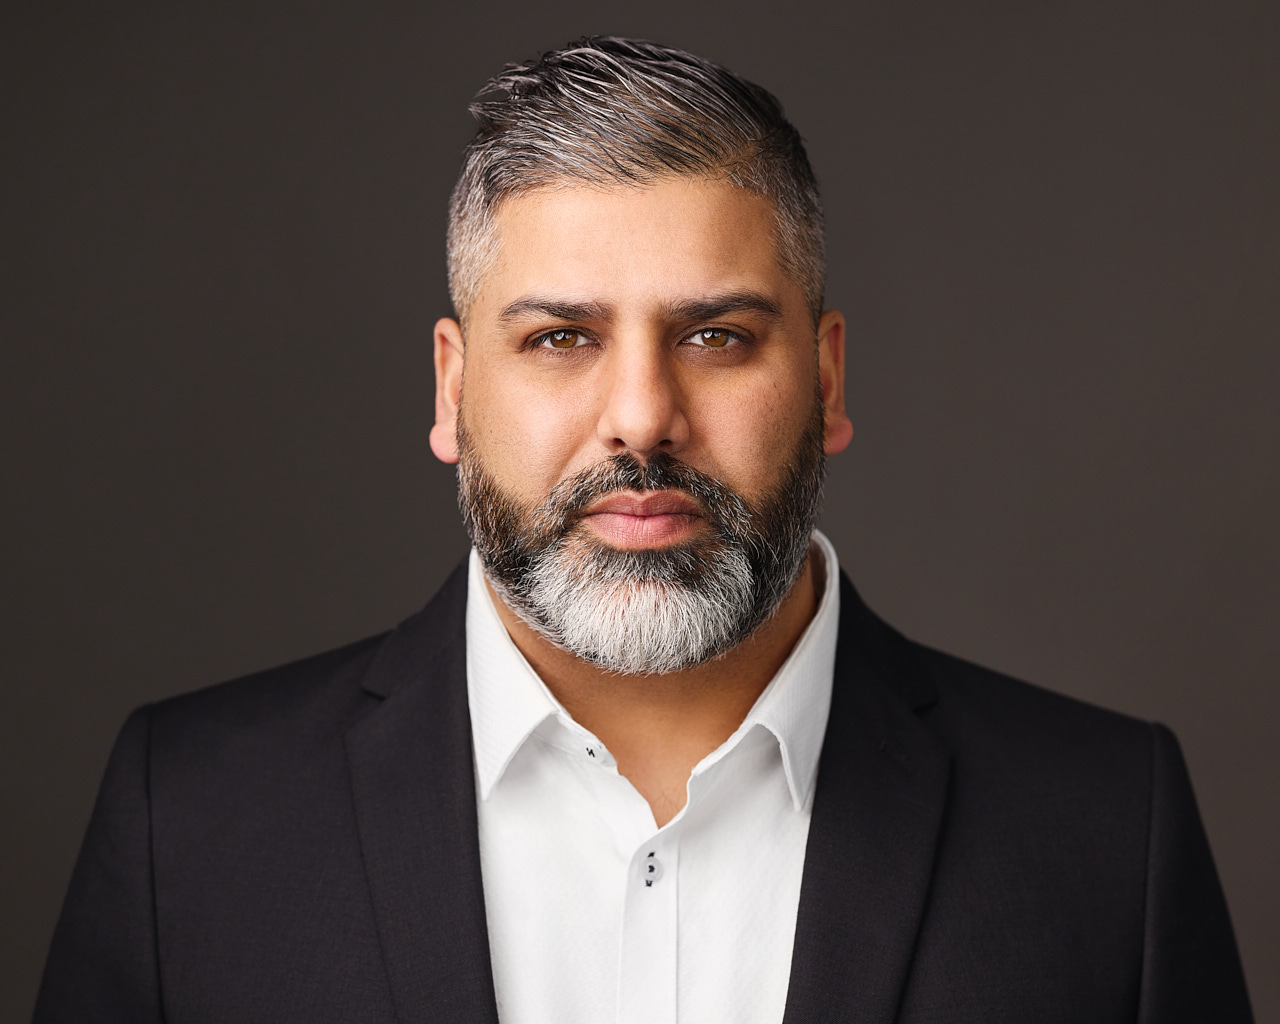 A professional business headshot of a man with a stern expression.